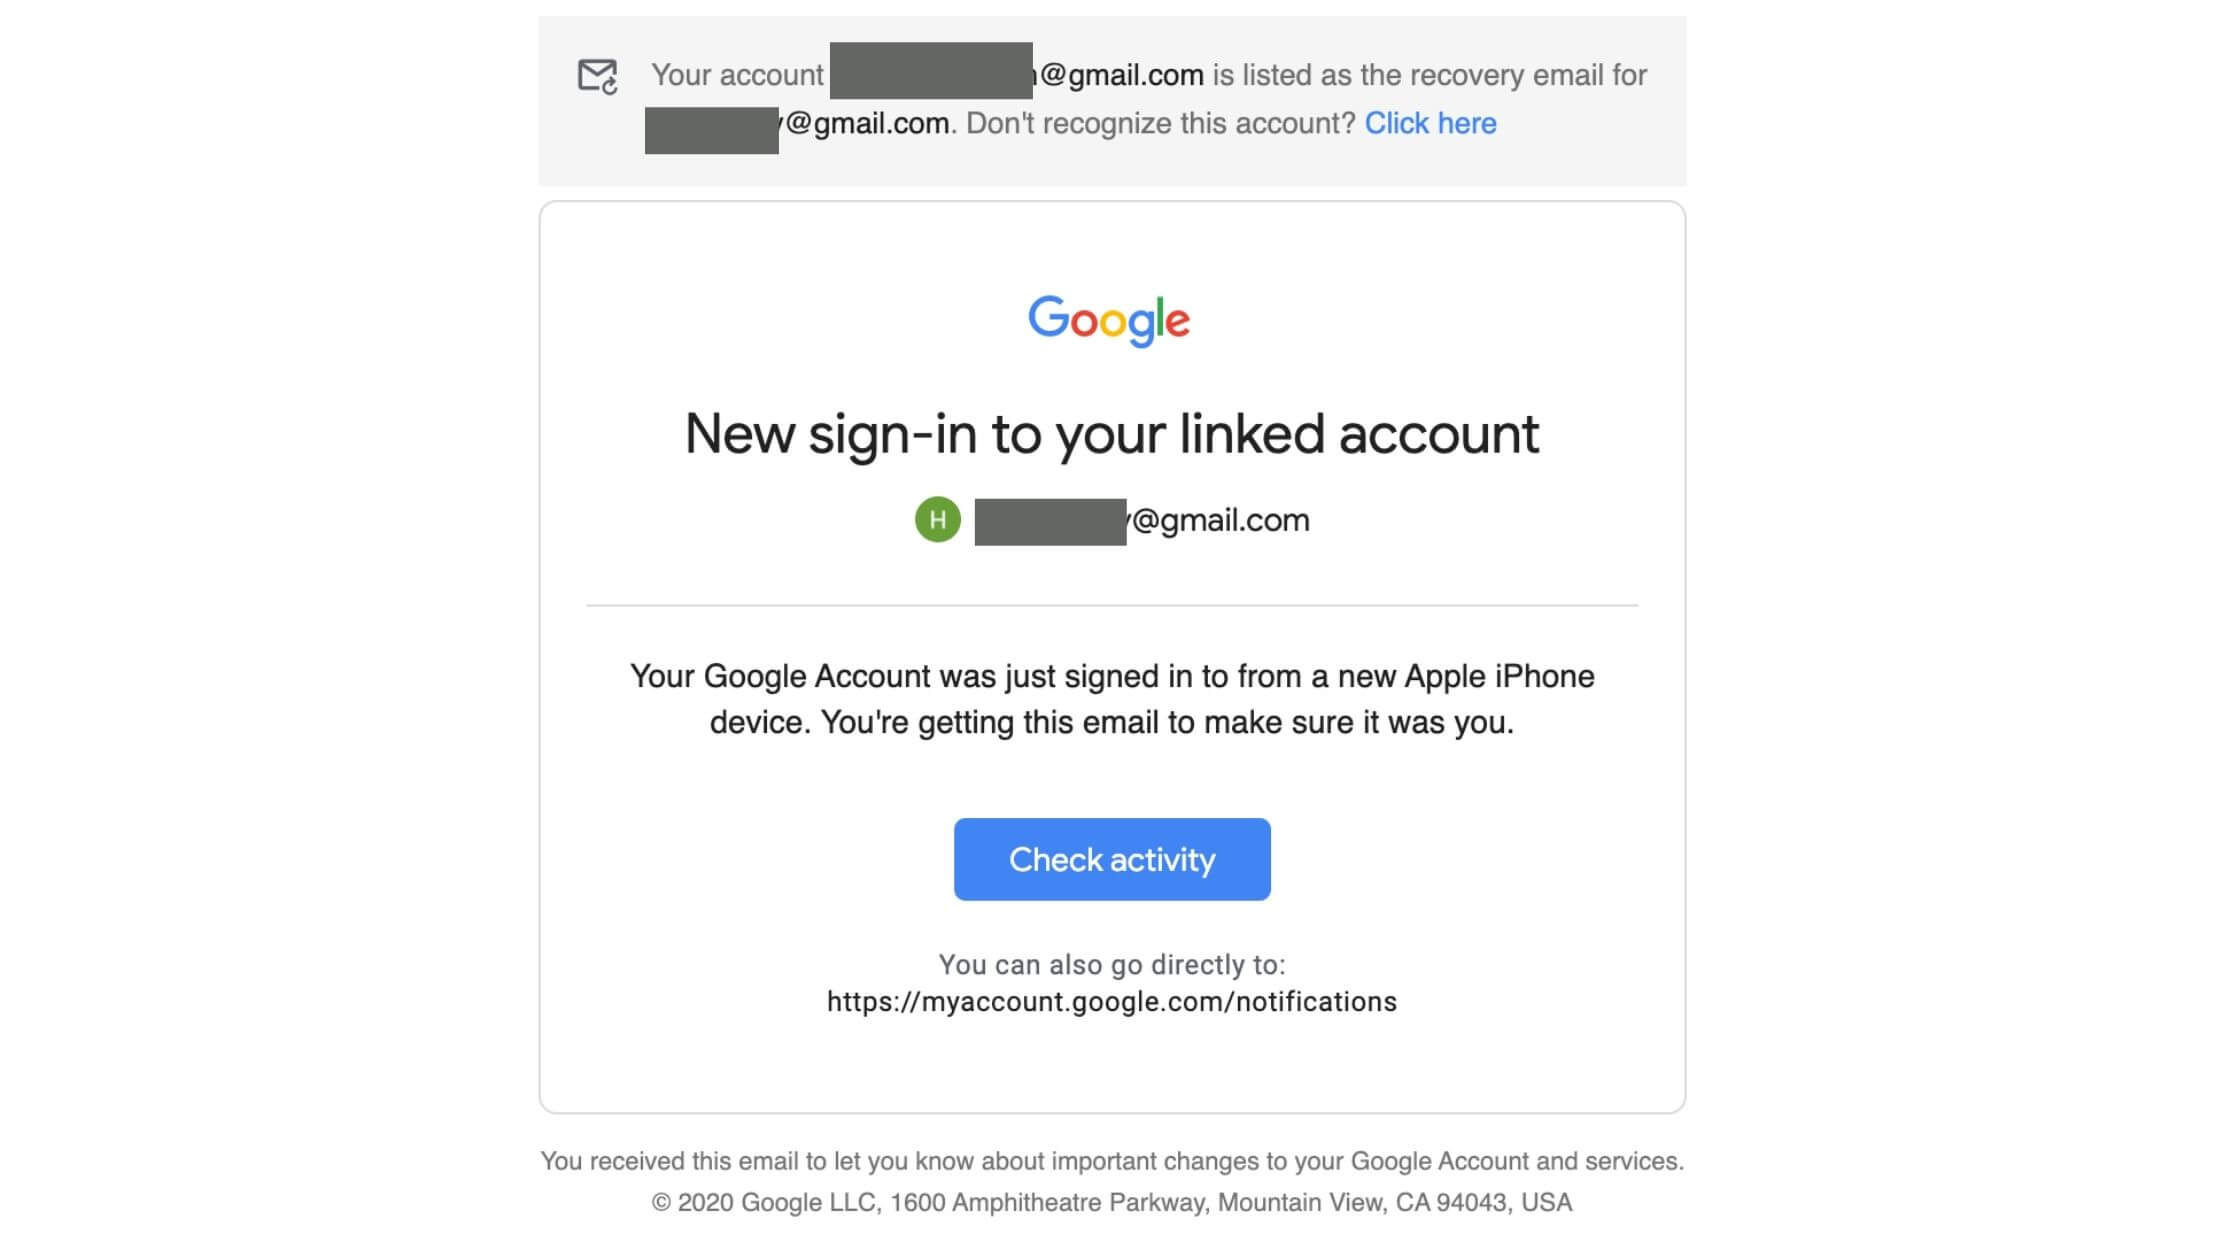 Google New Sign-in notification